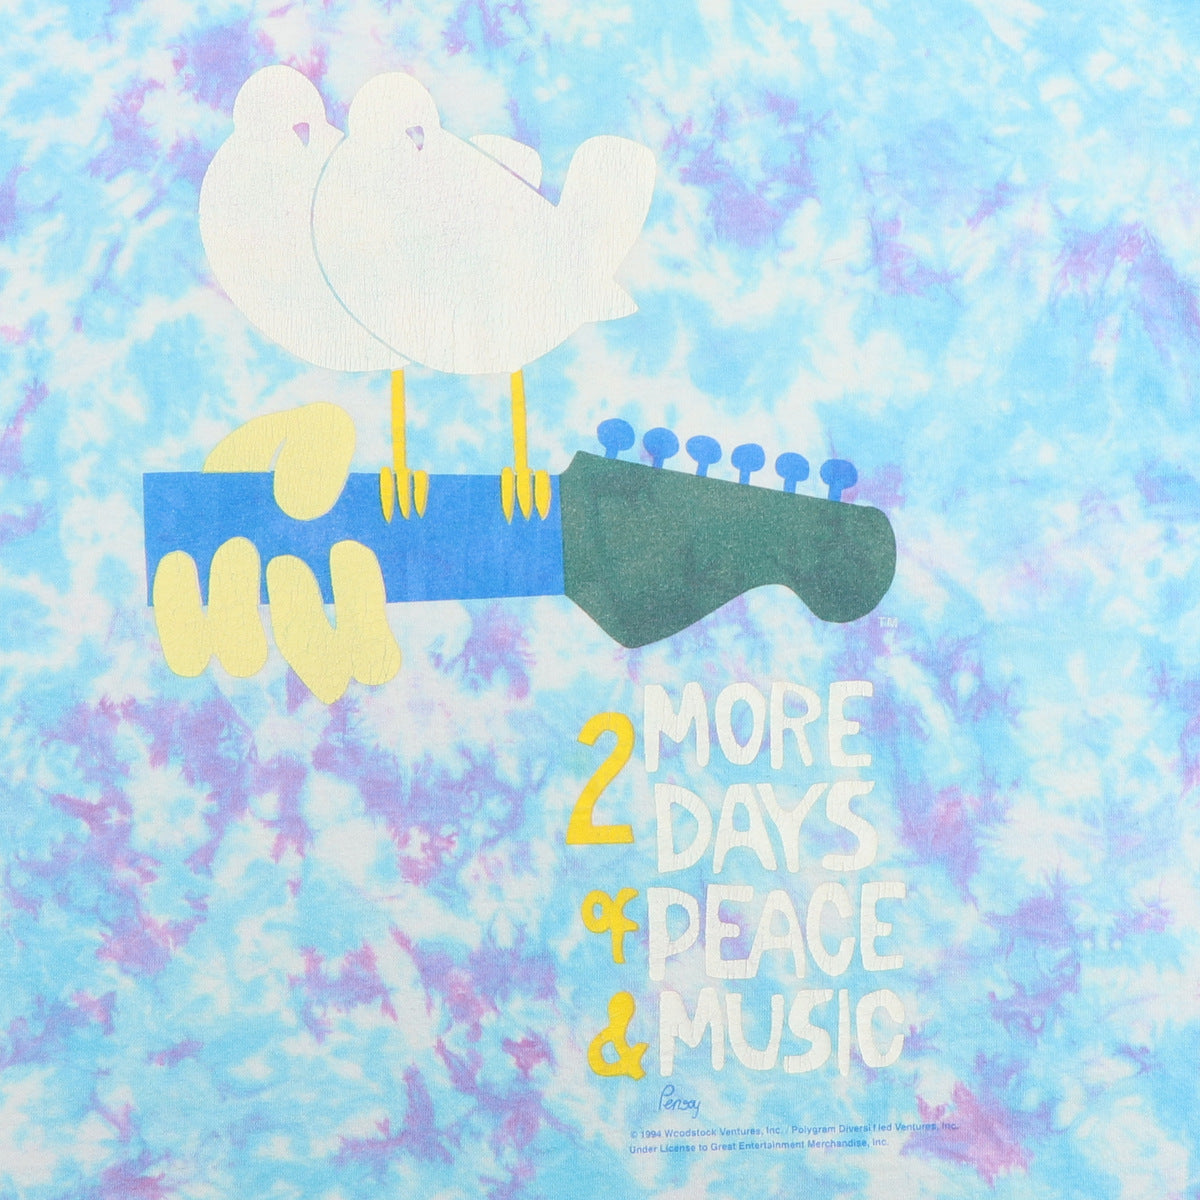 1994 Woodstock 2 Mores Days Of Music & Peace Tie Dye Shirt